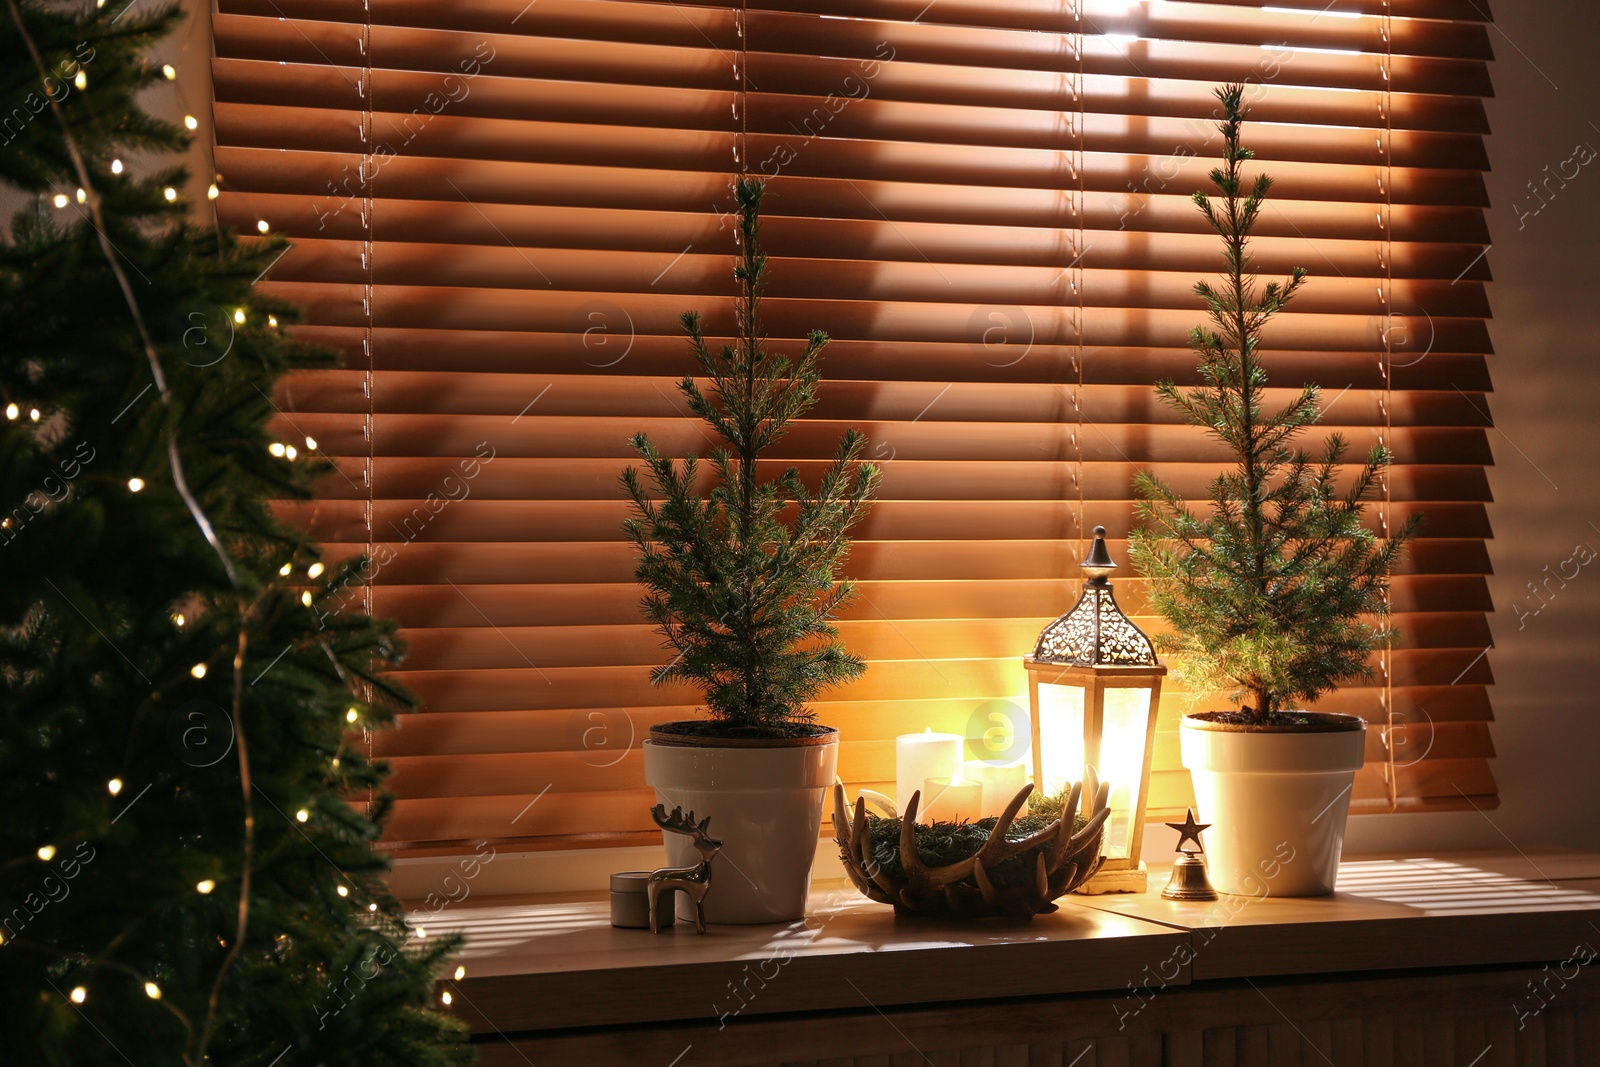 Photo of Beautiful room interior decorated with potted firs